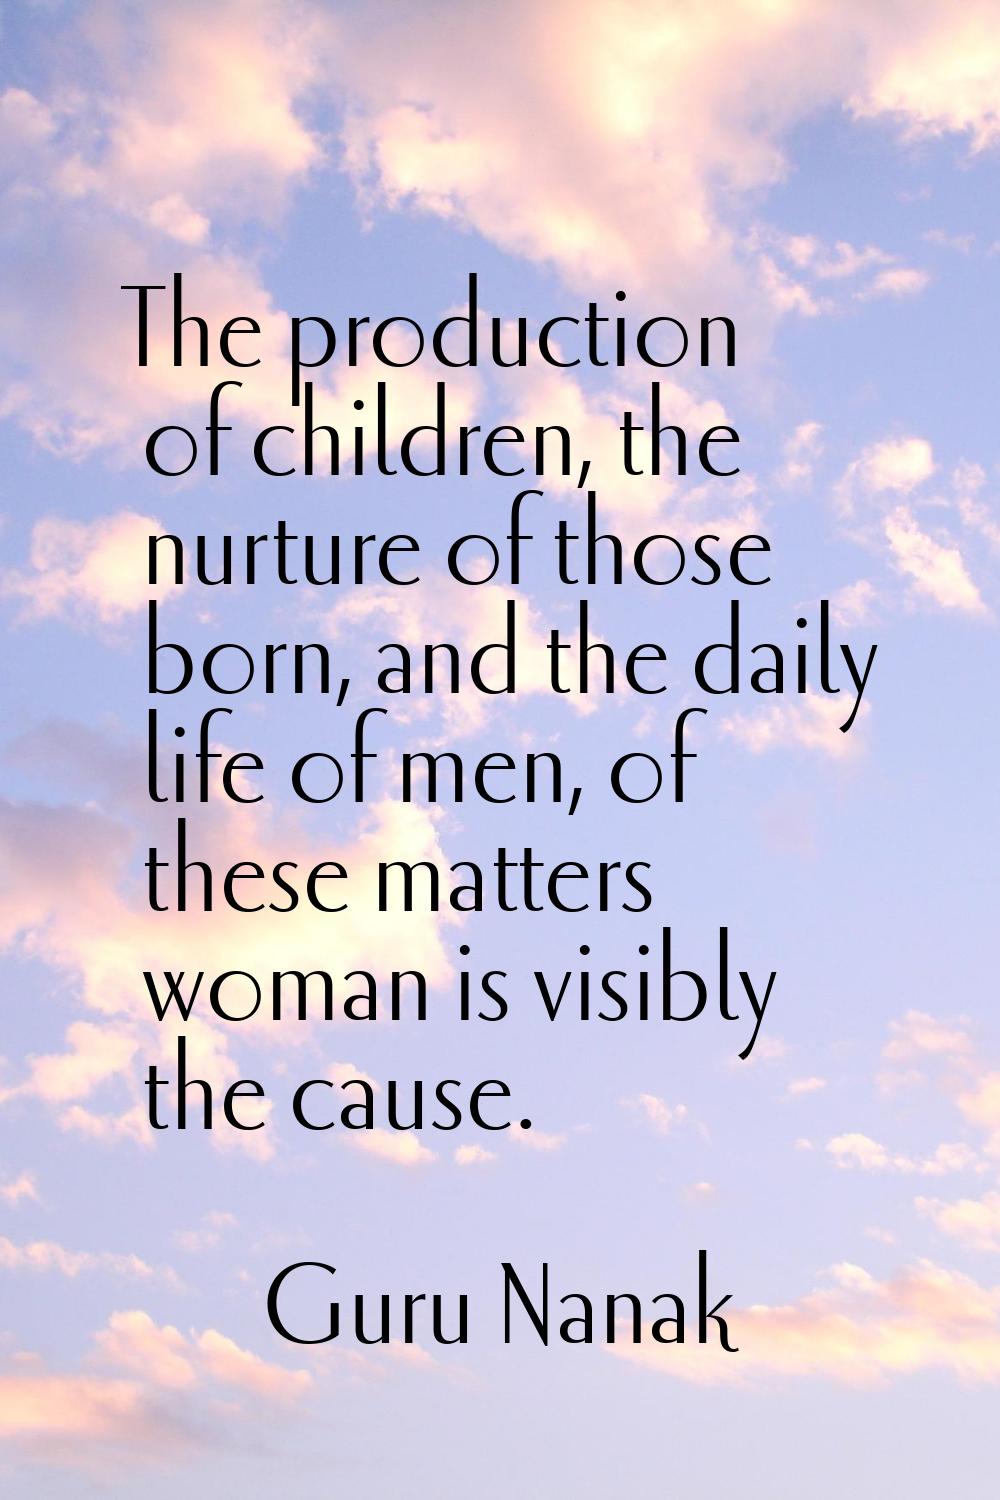 The production of children, the nurture of those born, and the daily life of men, of these matters 